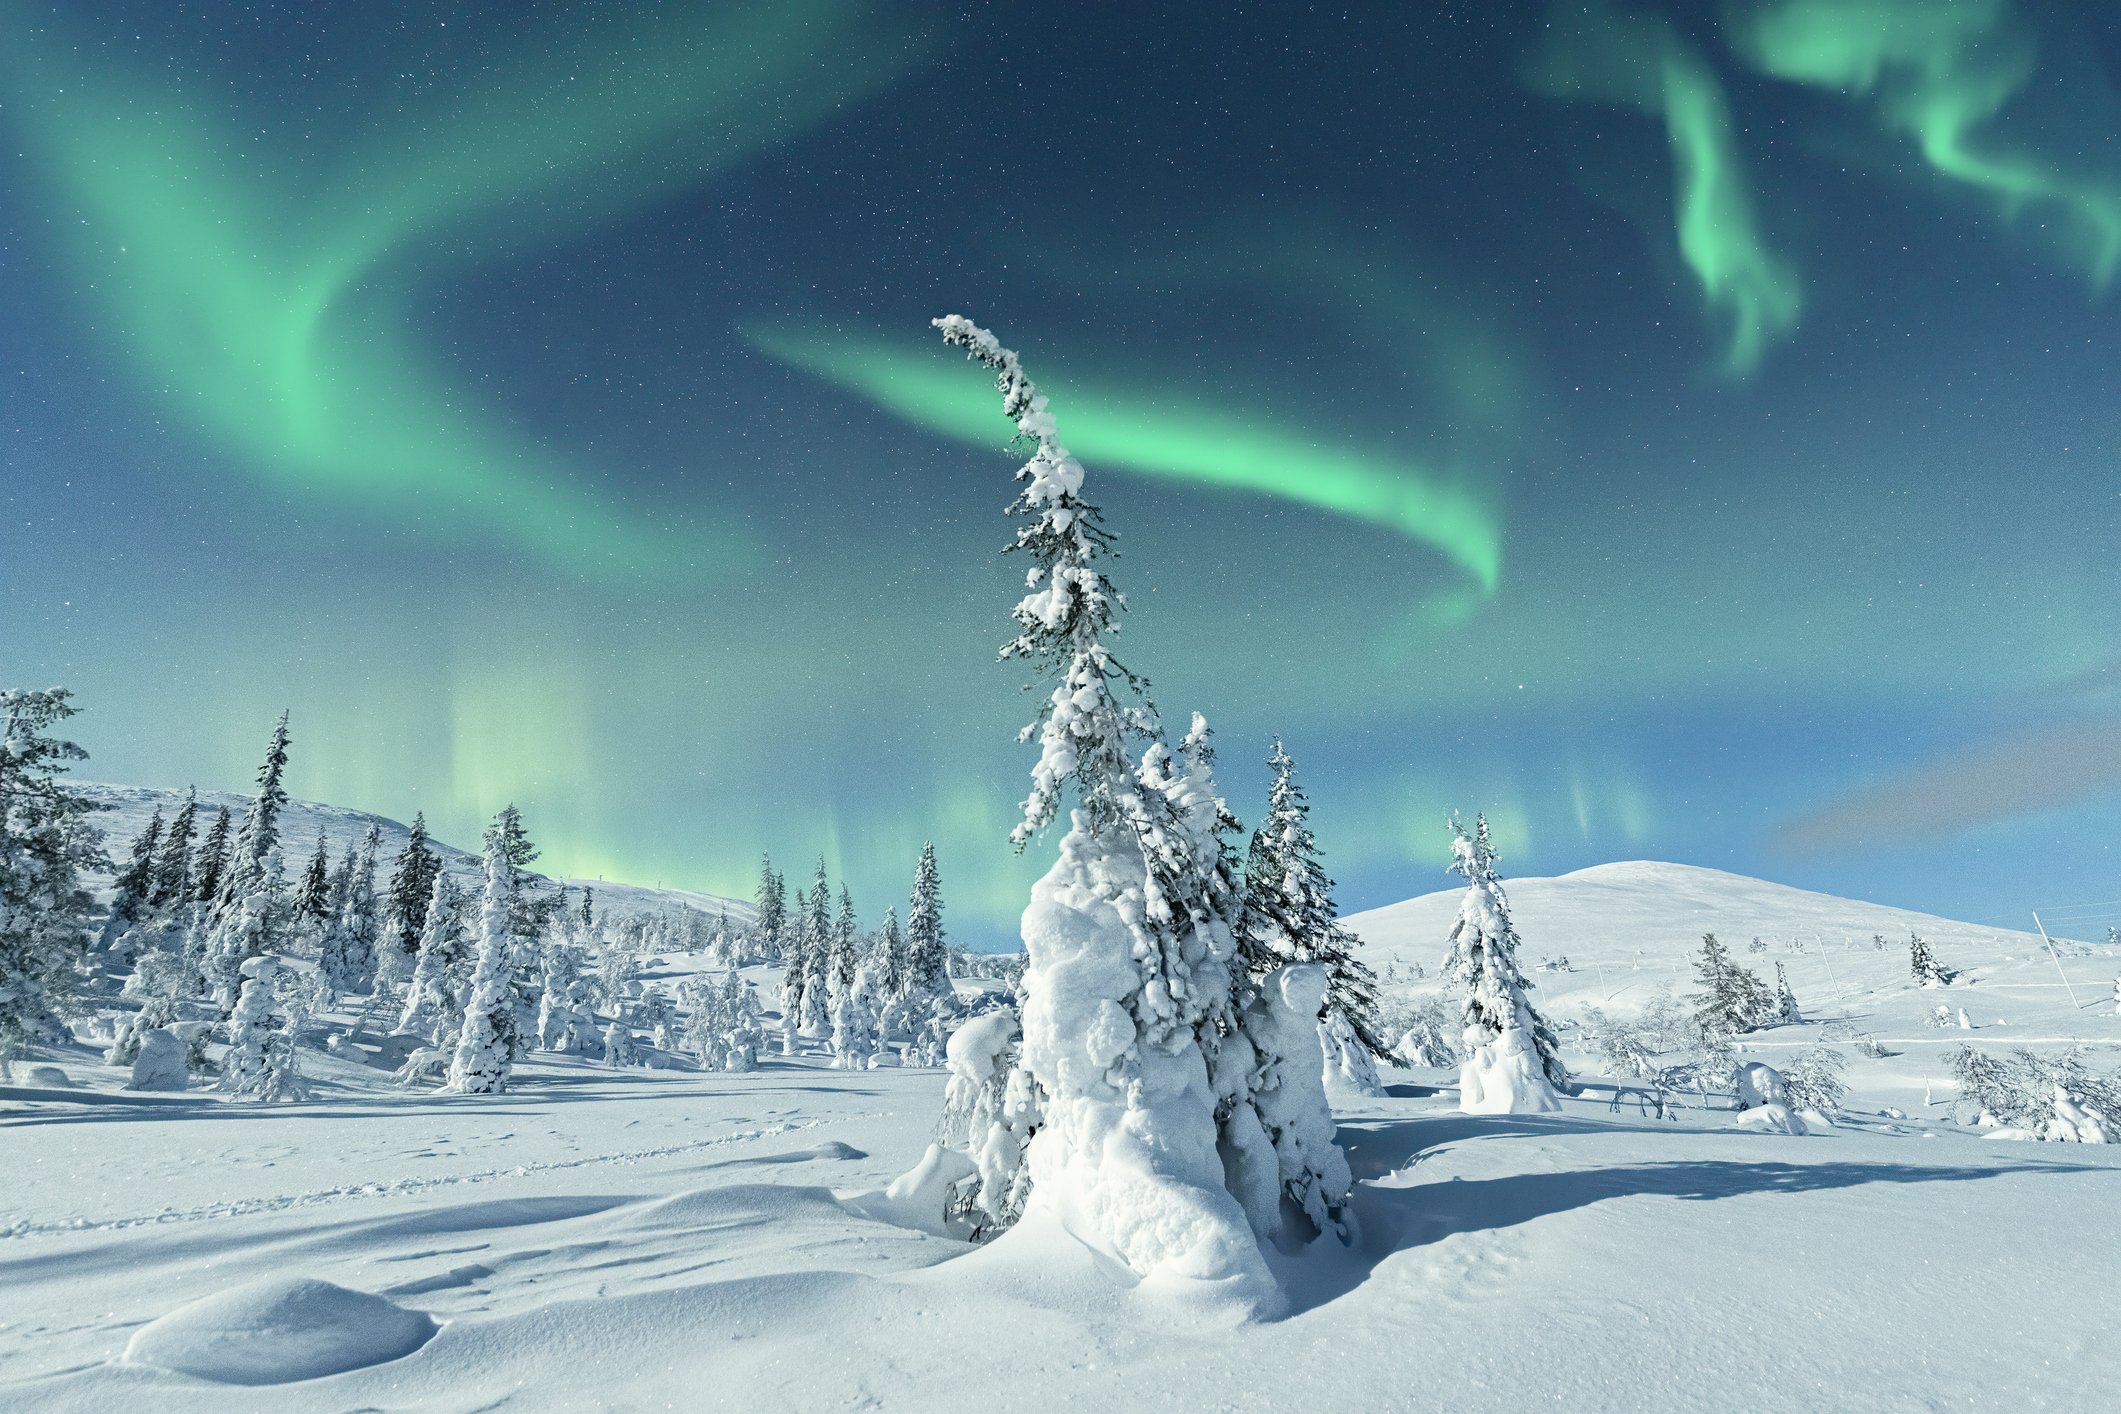 Moonlight on snow capped forest under the Northern Lights, Levi, Lapland, Finland